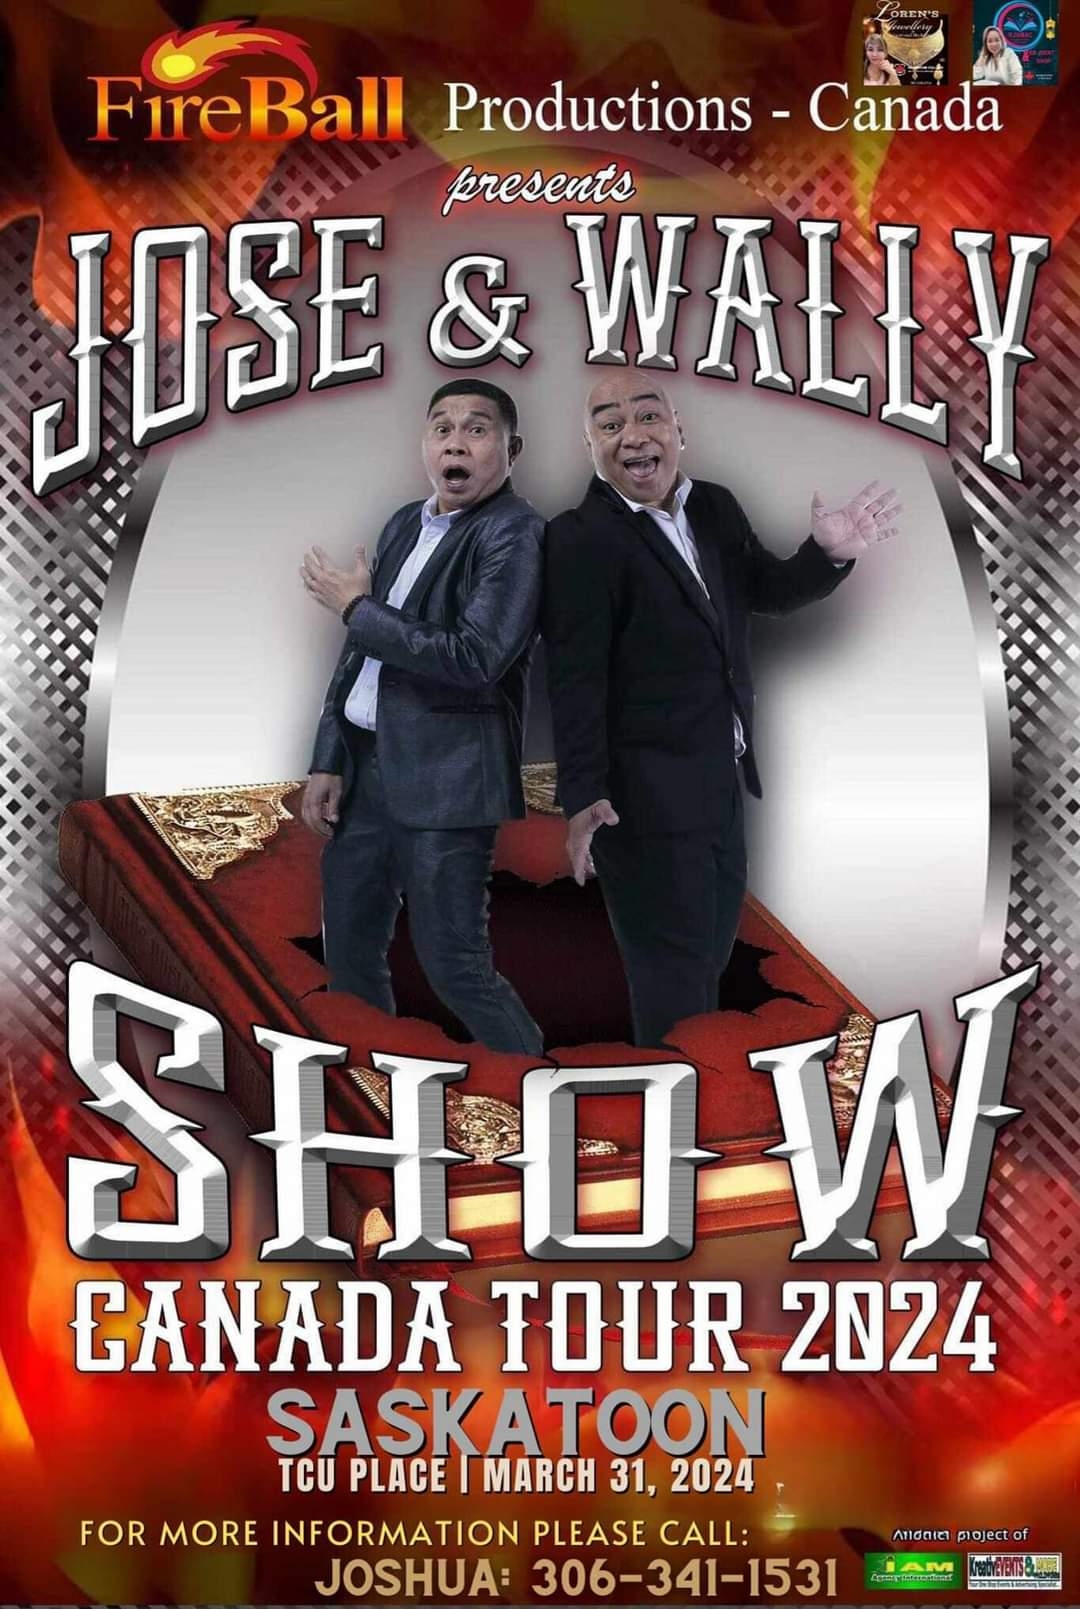 Jose & Wally Show - March 31st 2024 at TCU Place